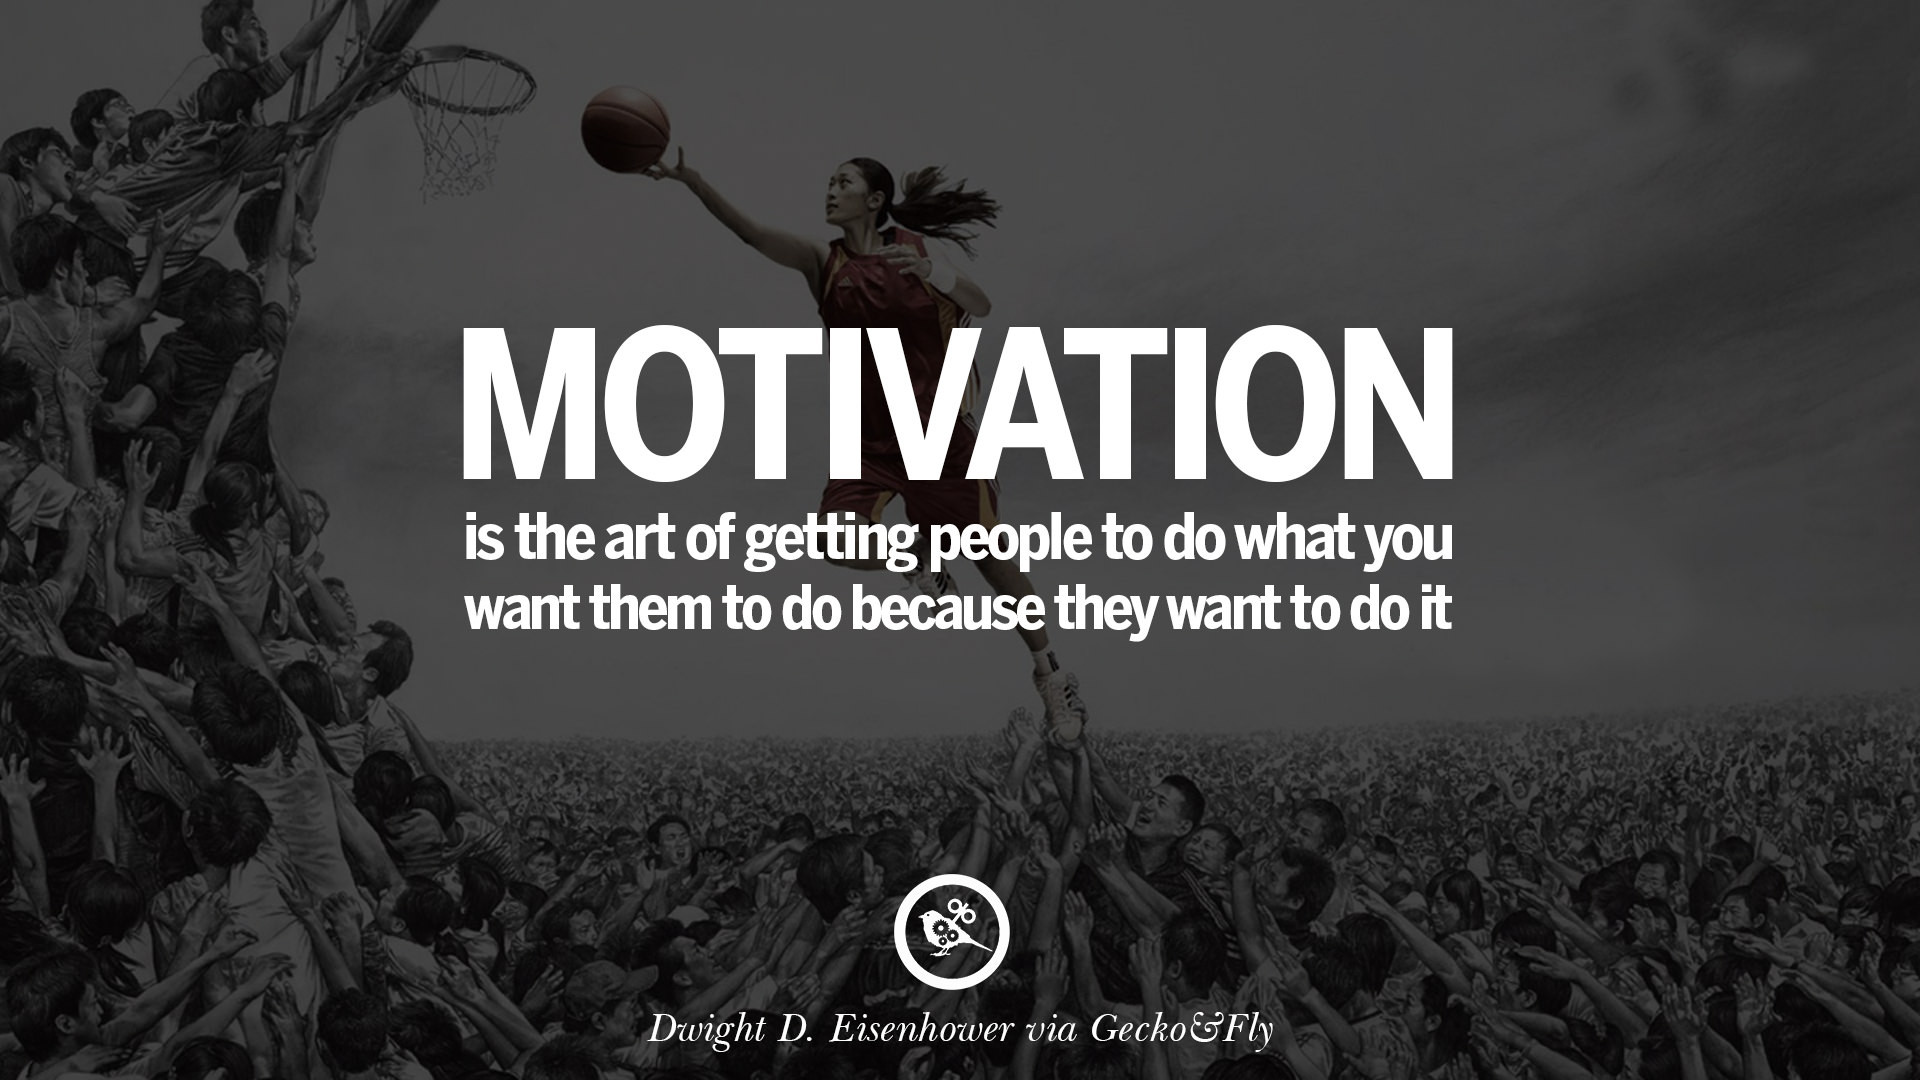 Motivational Poster Quotes
 20 Encouraging and Motivational Poster Quotes on Sports